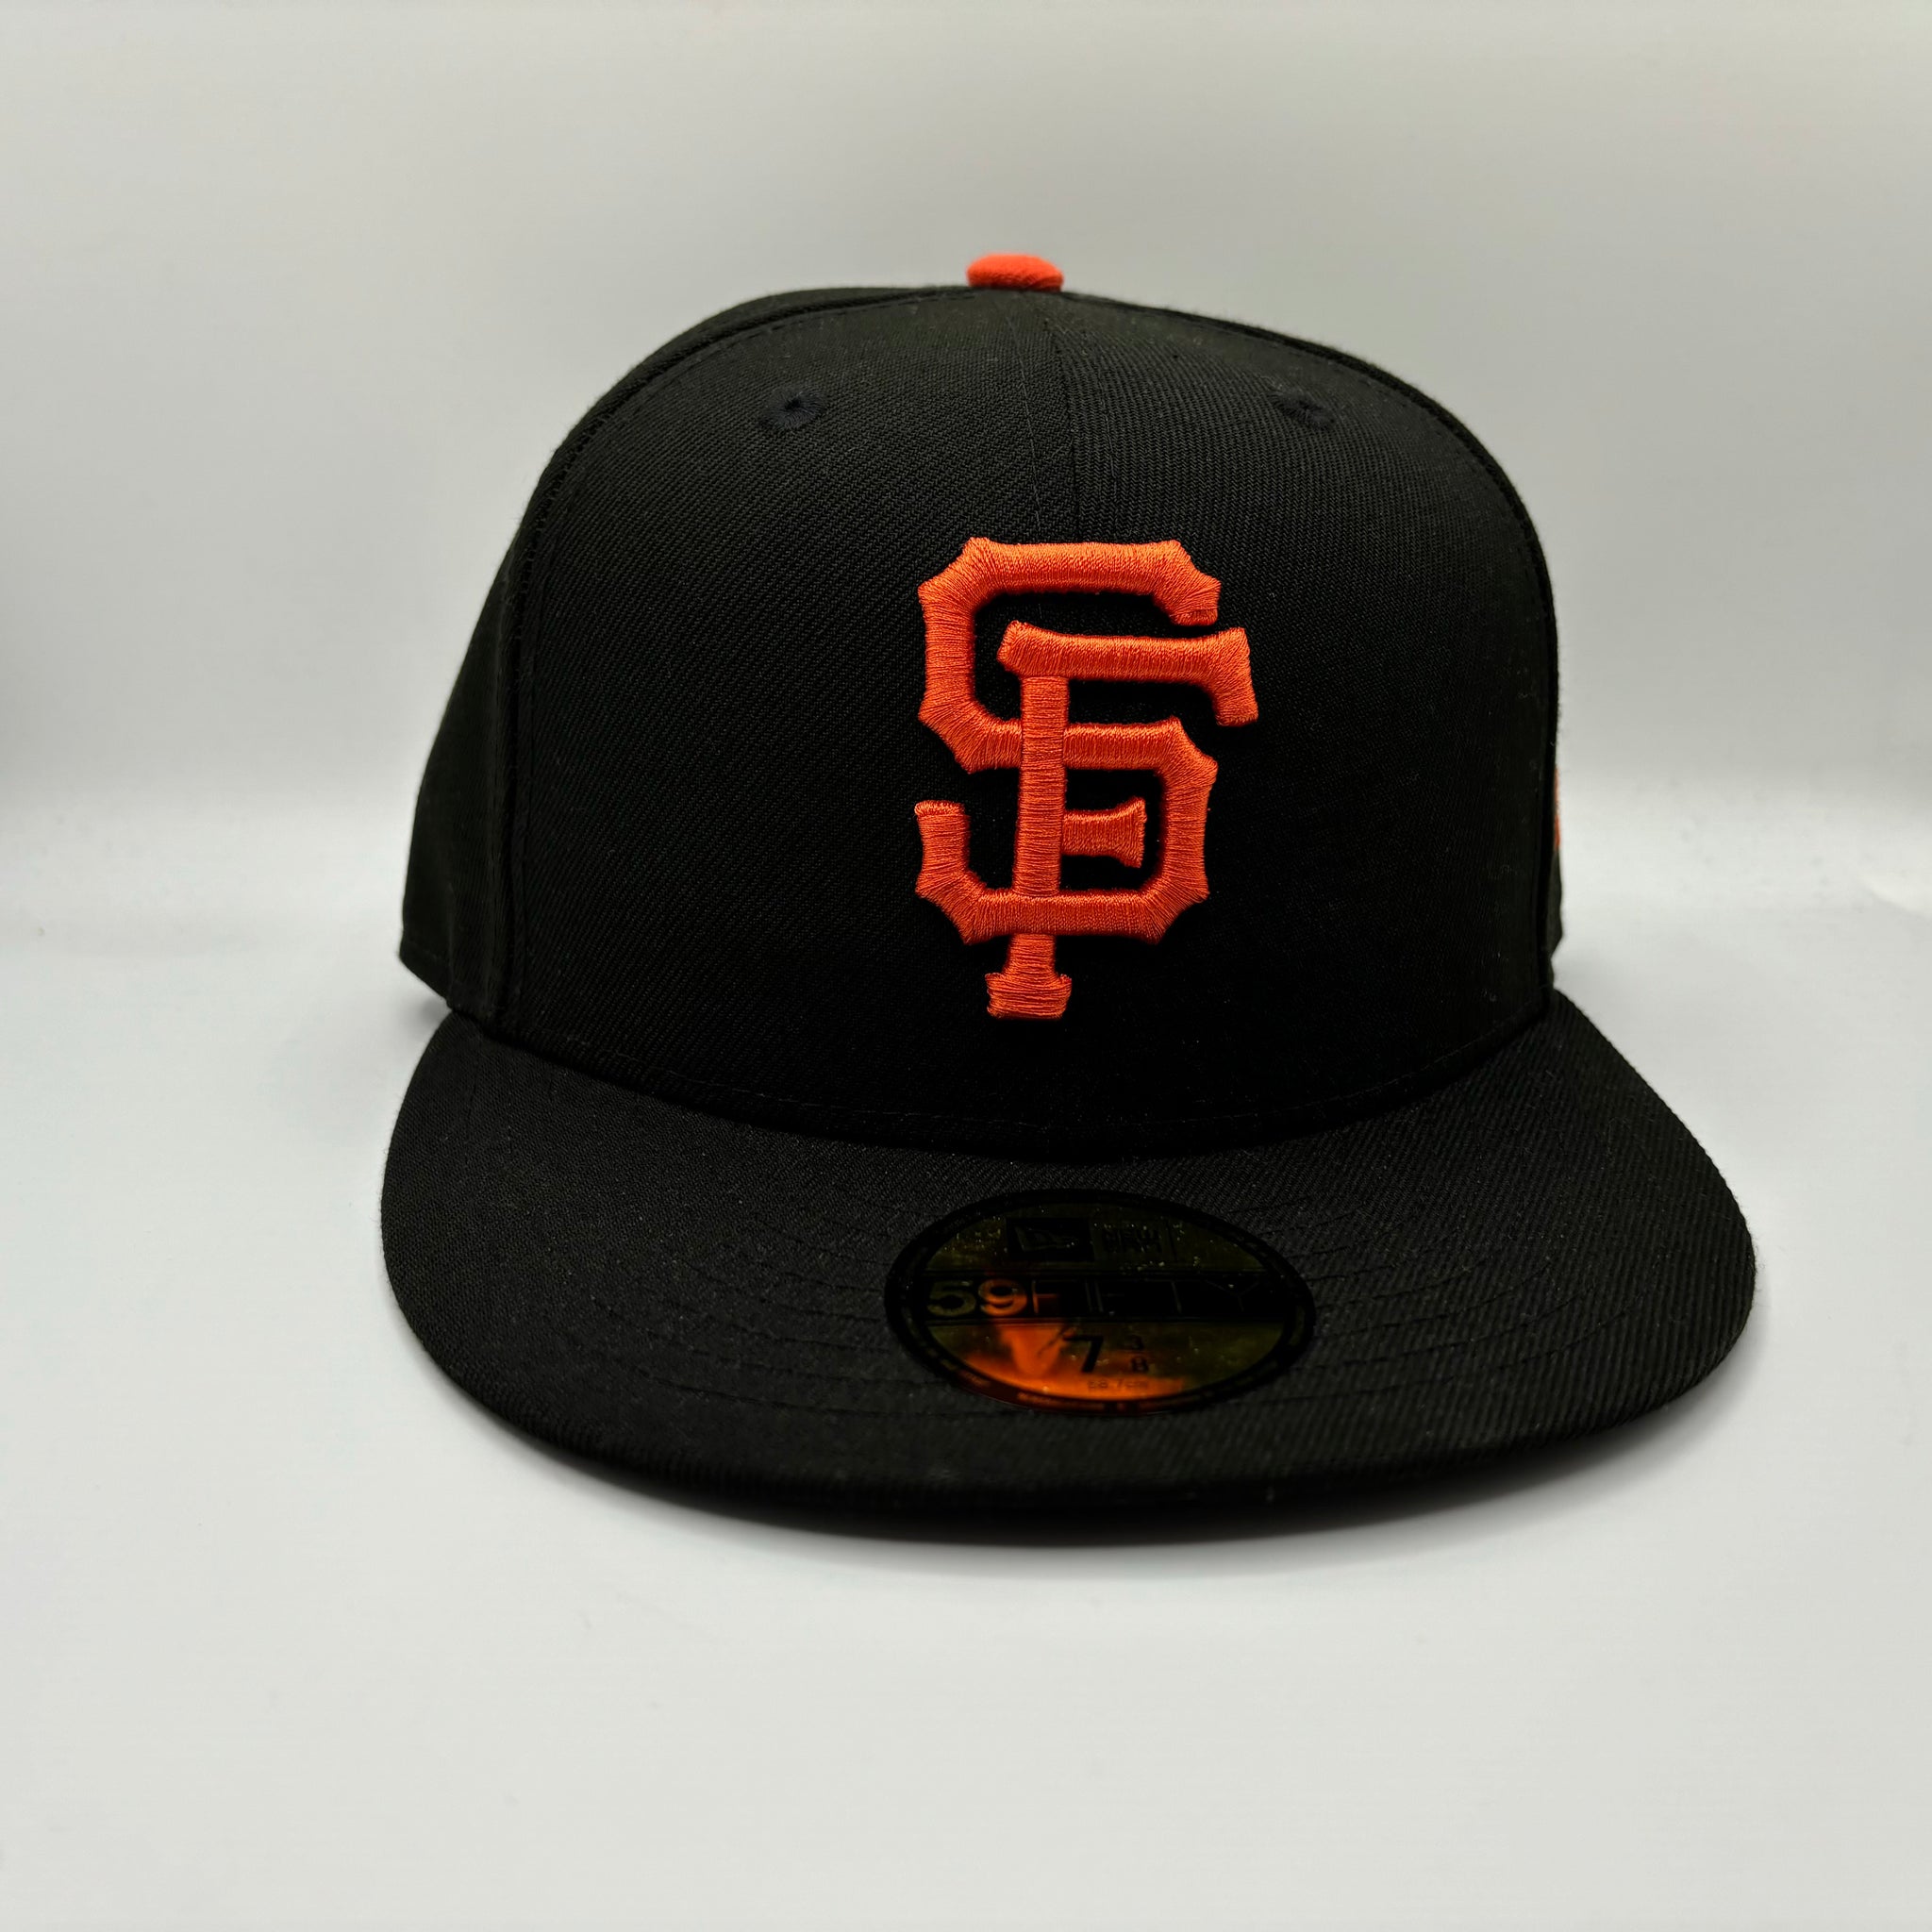 San Francisco Giants Performance 59fifty Fitted Hat